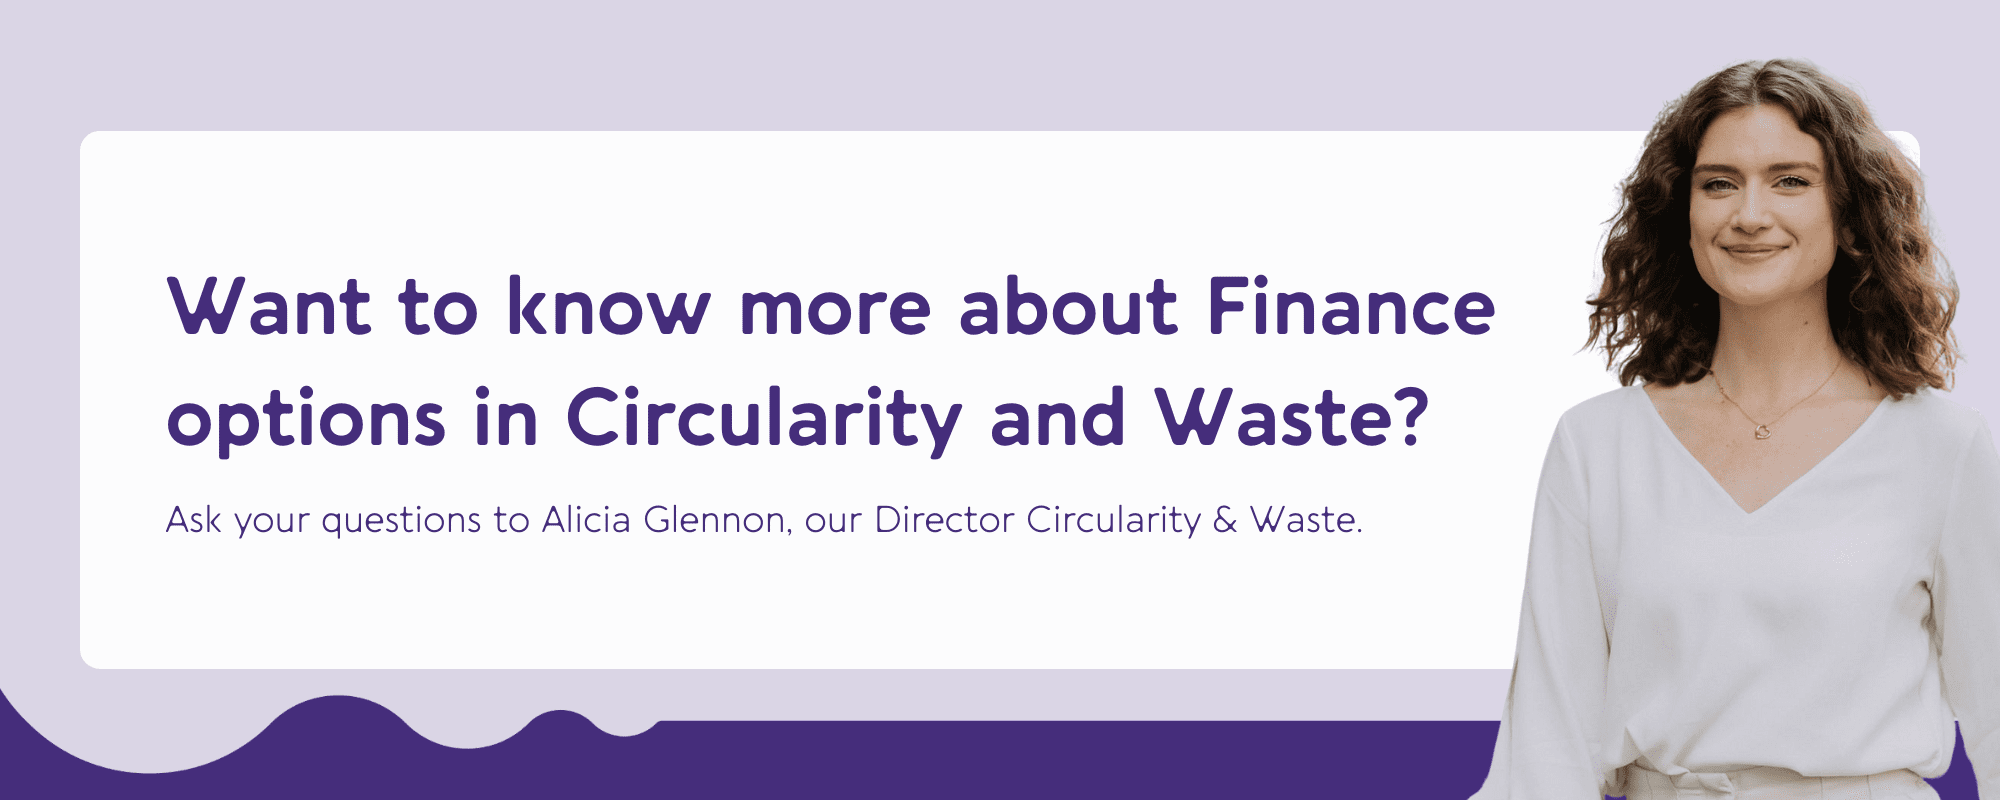 Want to know more about Finance options in Circularity and Waste?